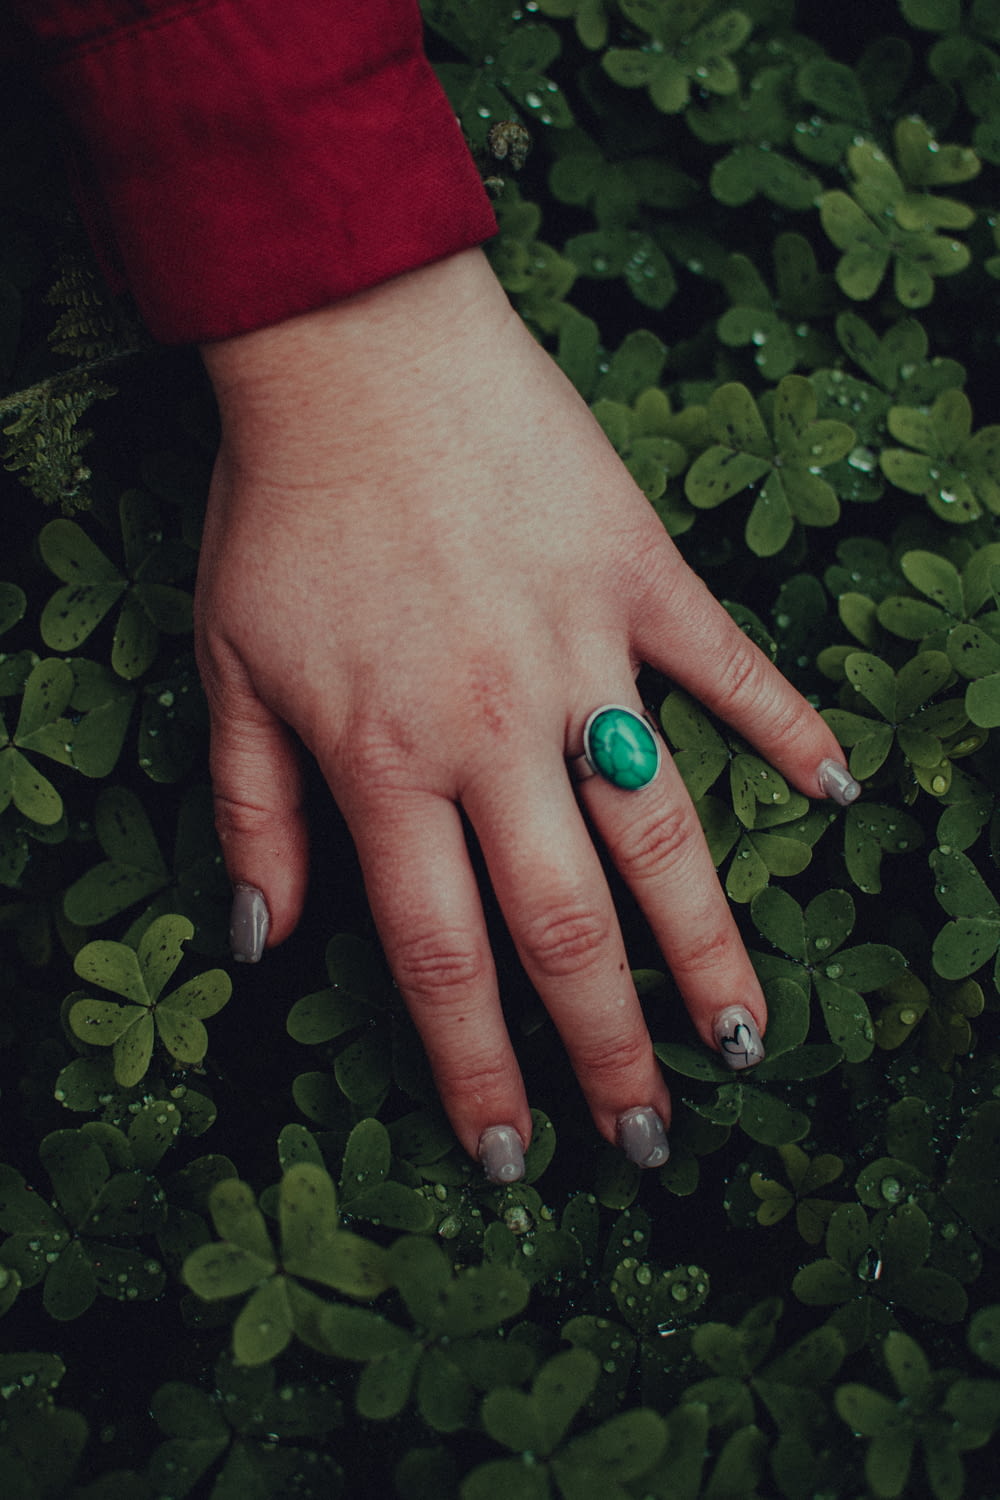 person with green nail polish holding green round ornament